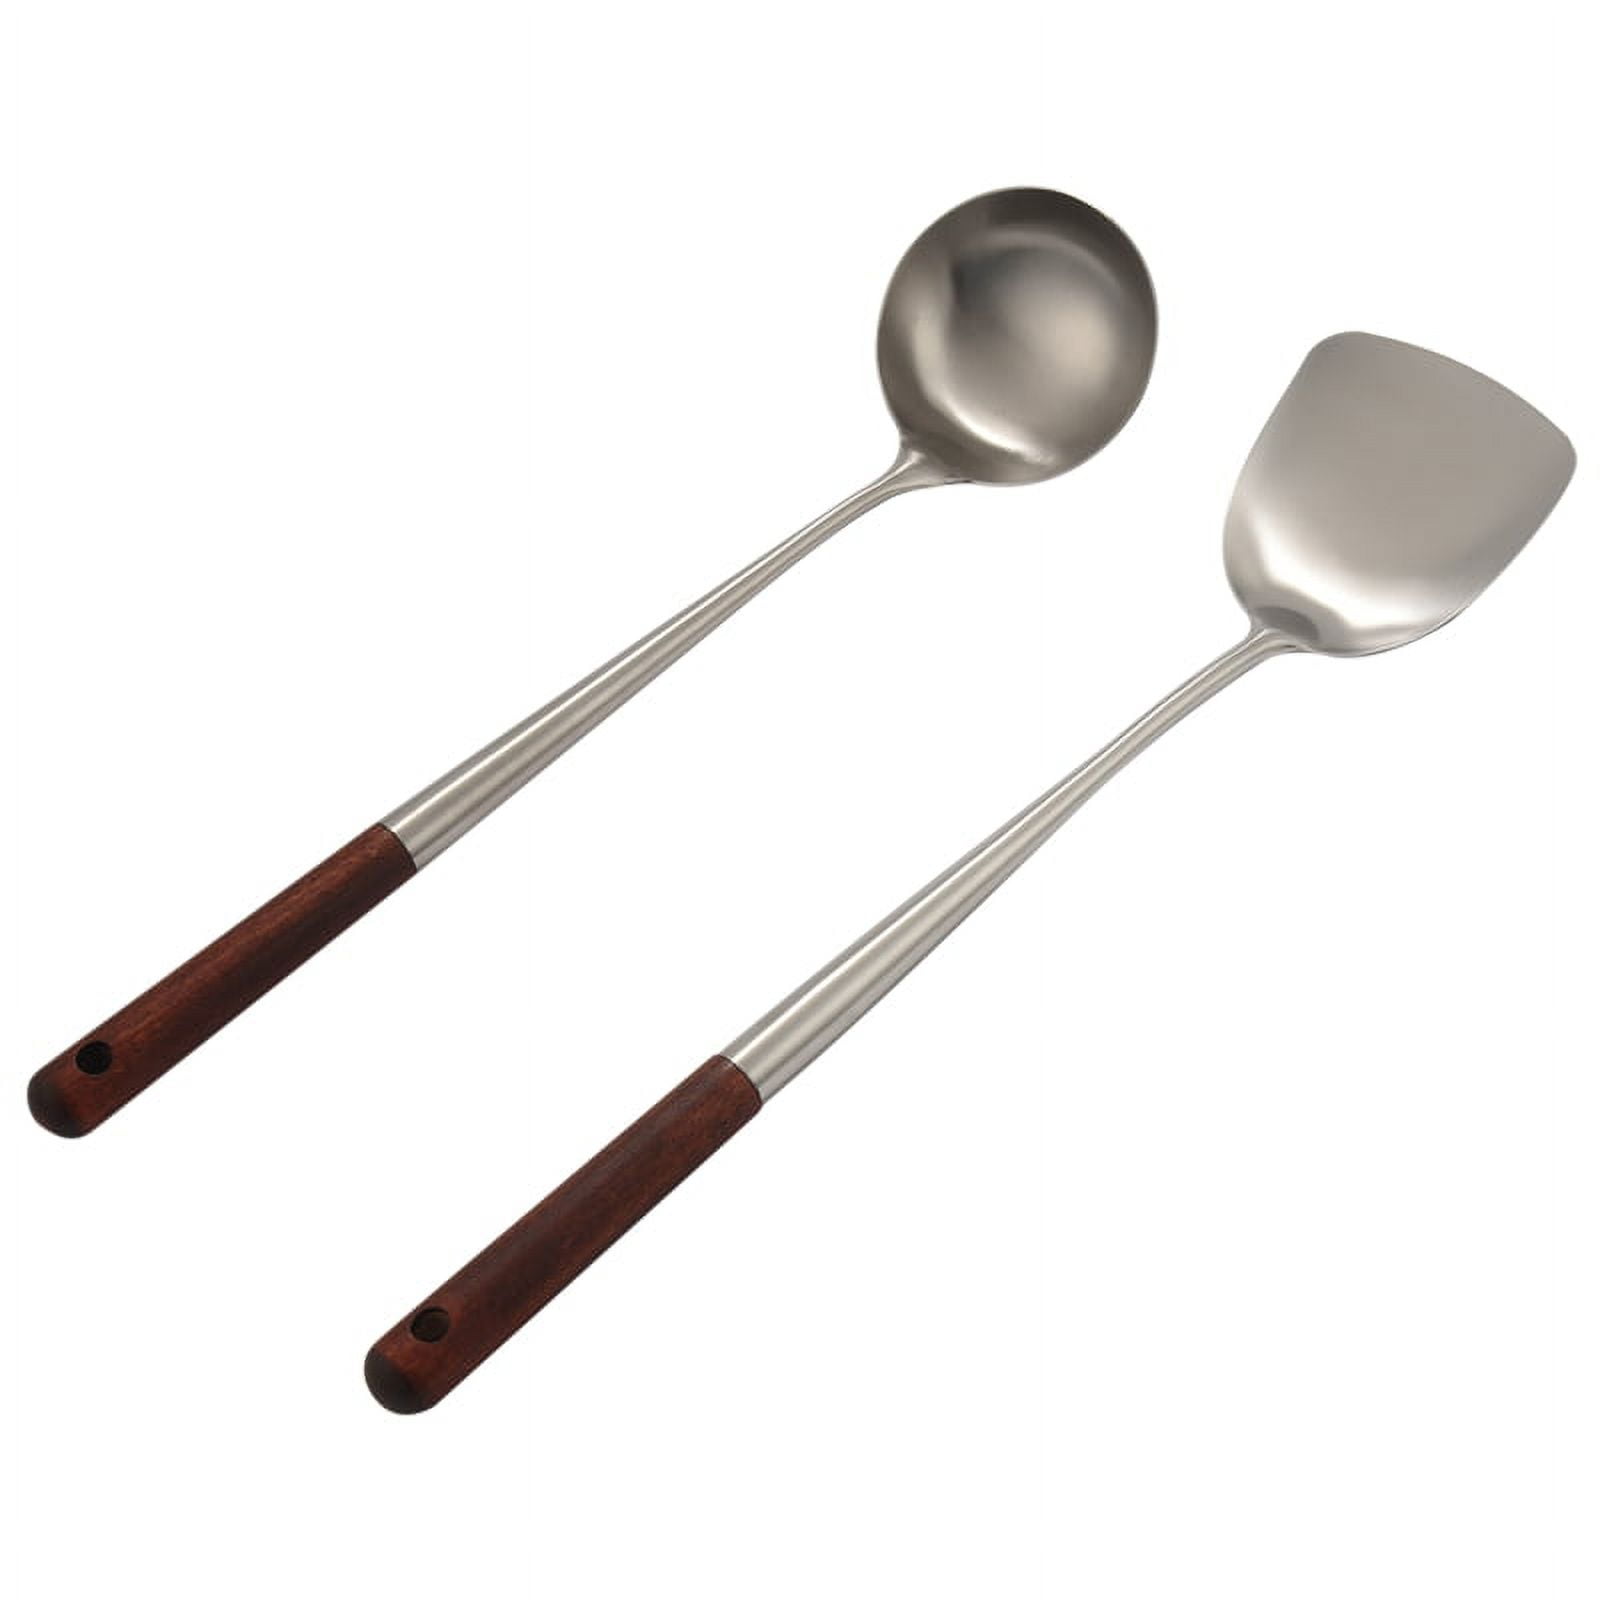 Marte wok spatula and ladle,skimmer slotted spoon set - asian wok cooking  tools - 304 stainless steel wide wok spatula - wok utensi